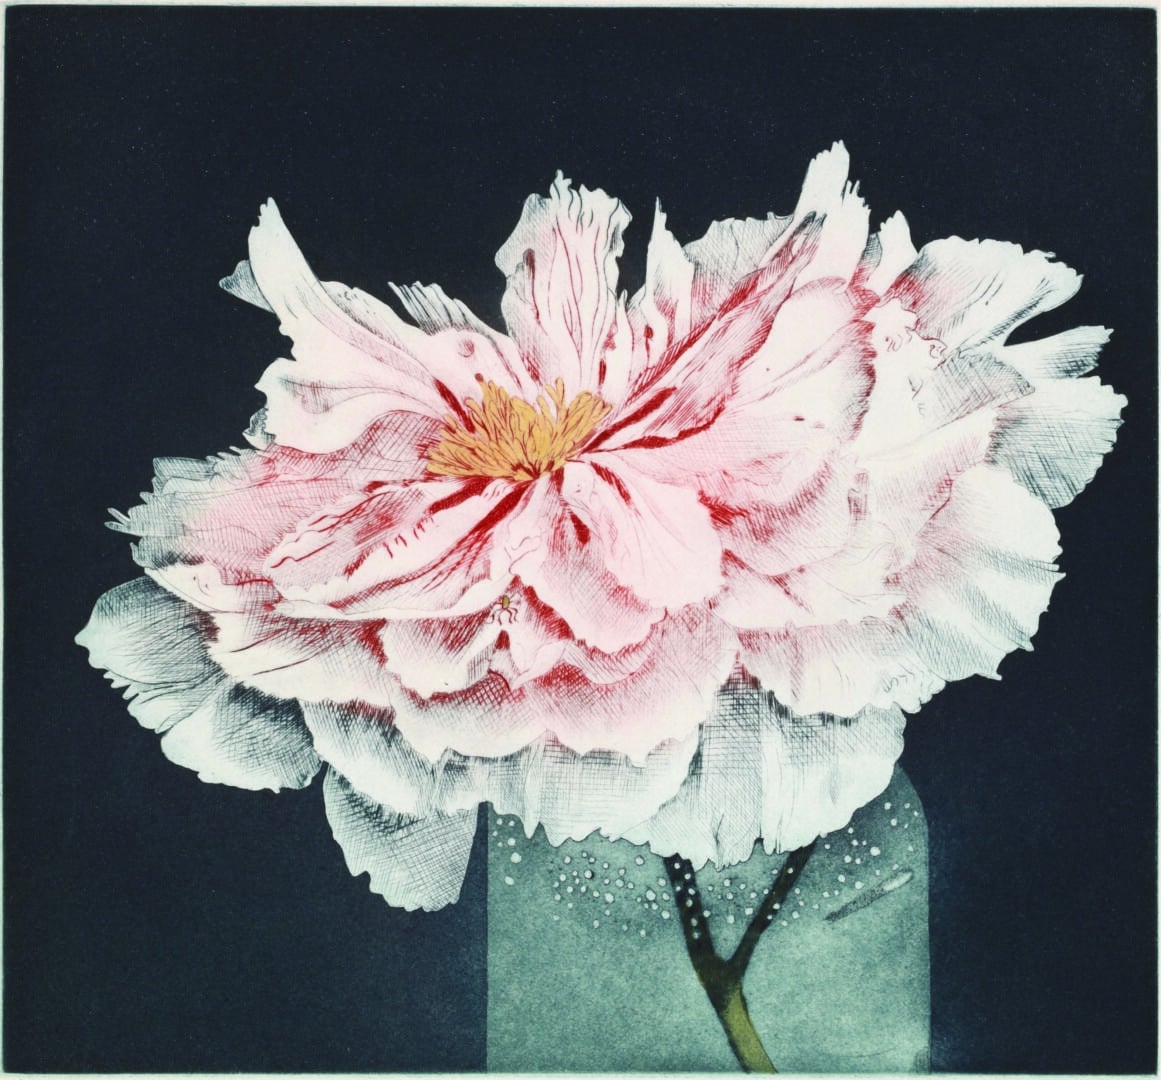 Greta's Peony, 1976, aquatint and drypoint in blue and red inks, hand-colored with watercolor, 10 3/4 x 11 1/2 inches.